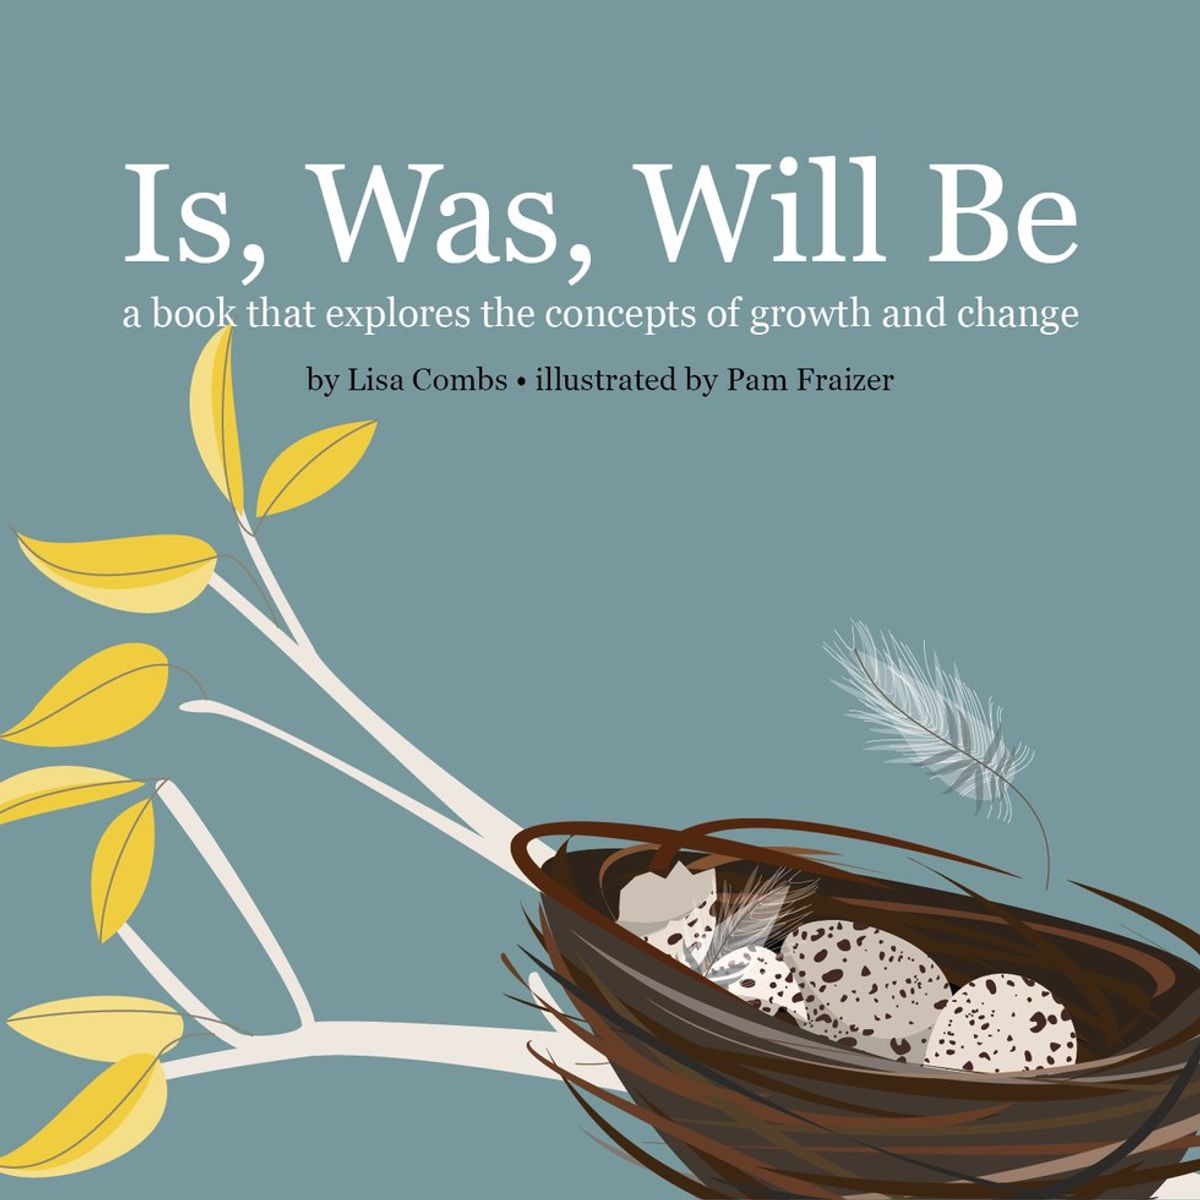 "Is, Was, Will Be"— A New Children's Book About Transitions